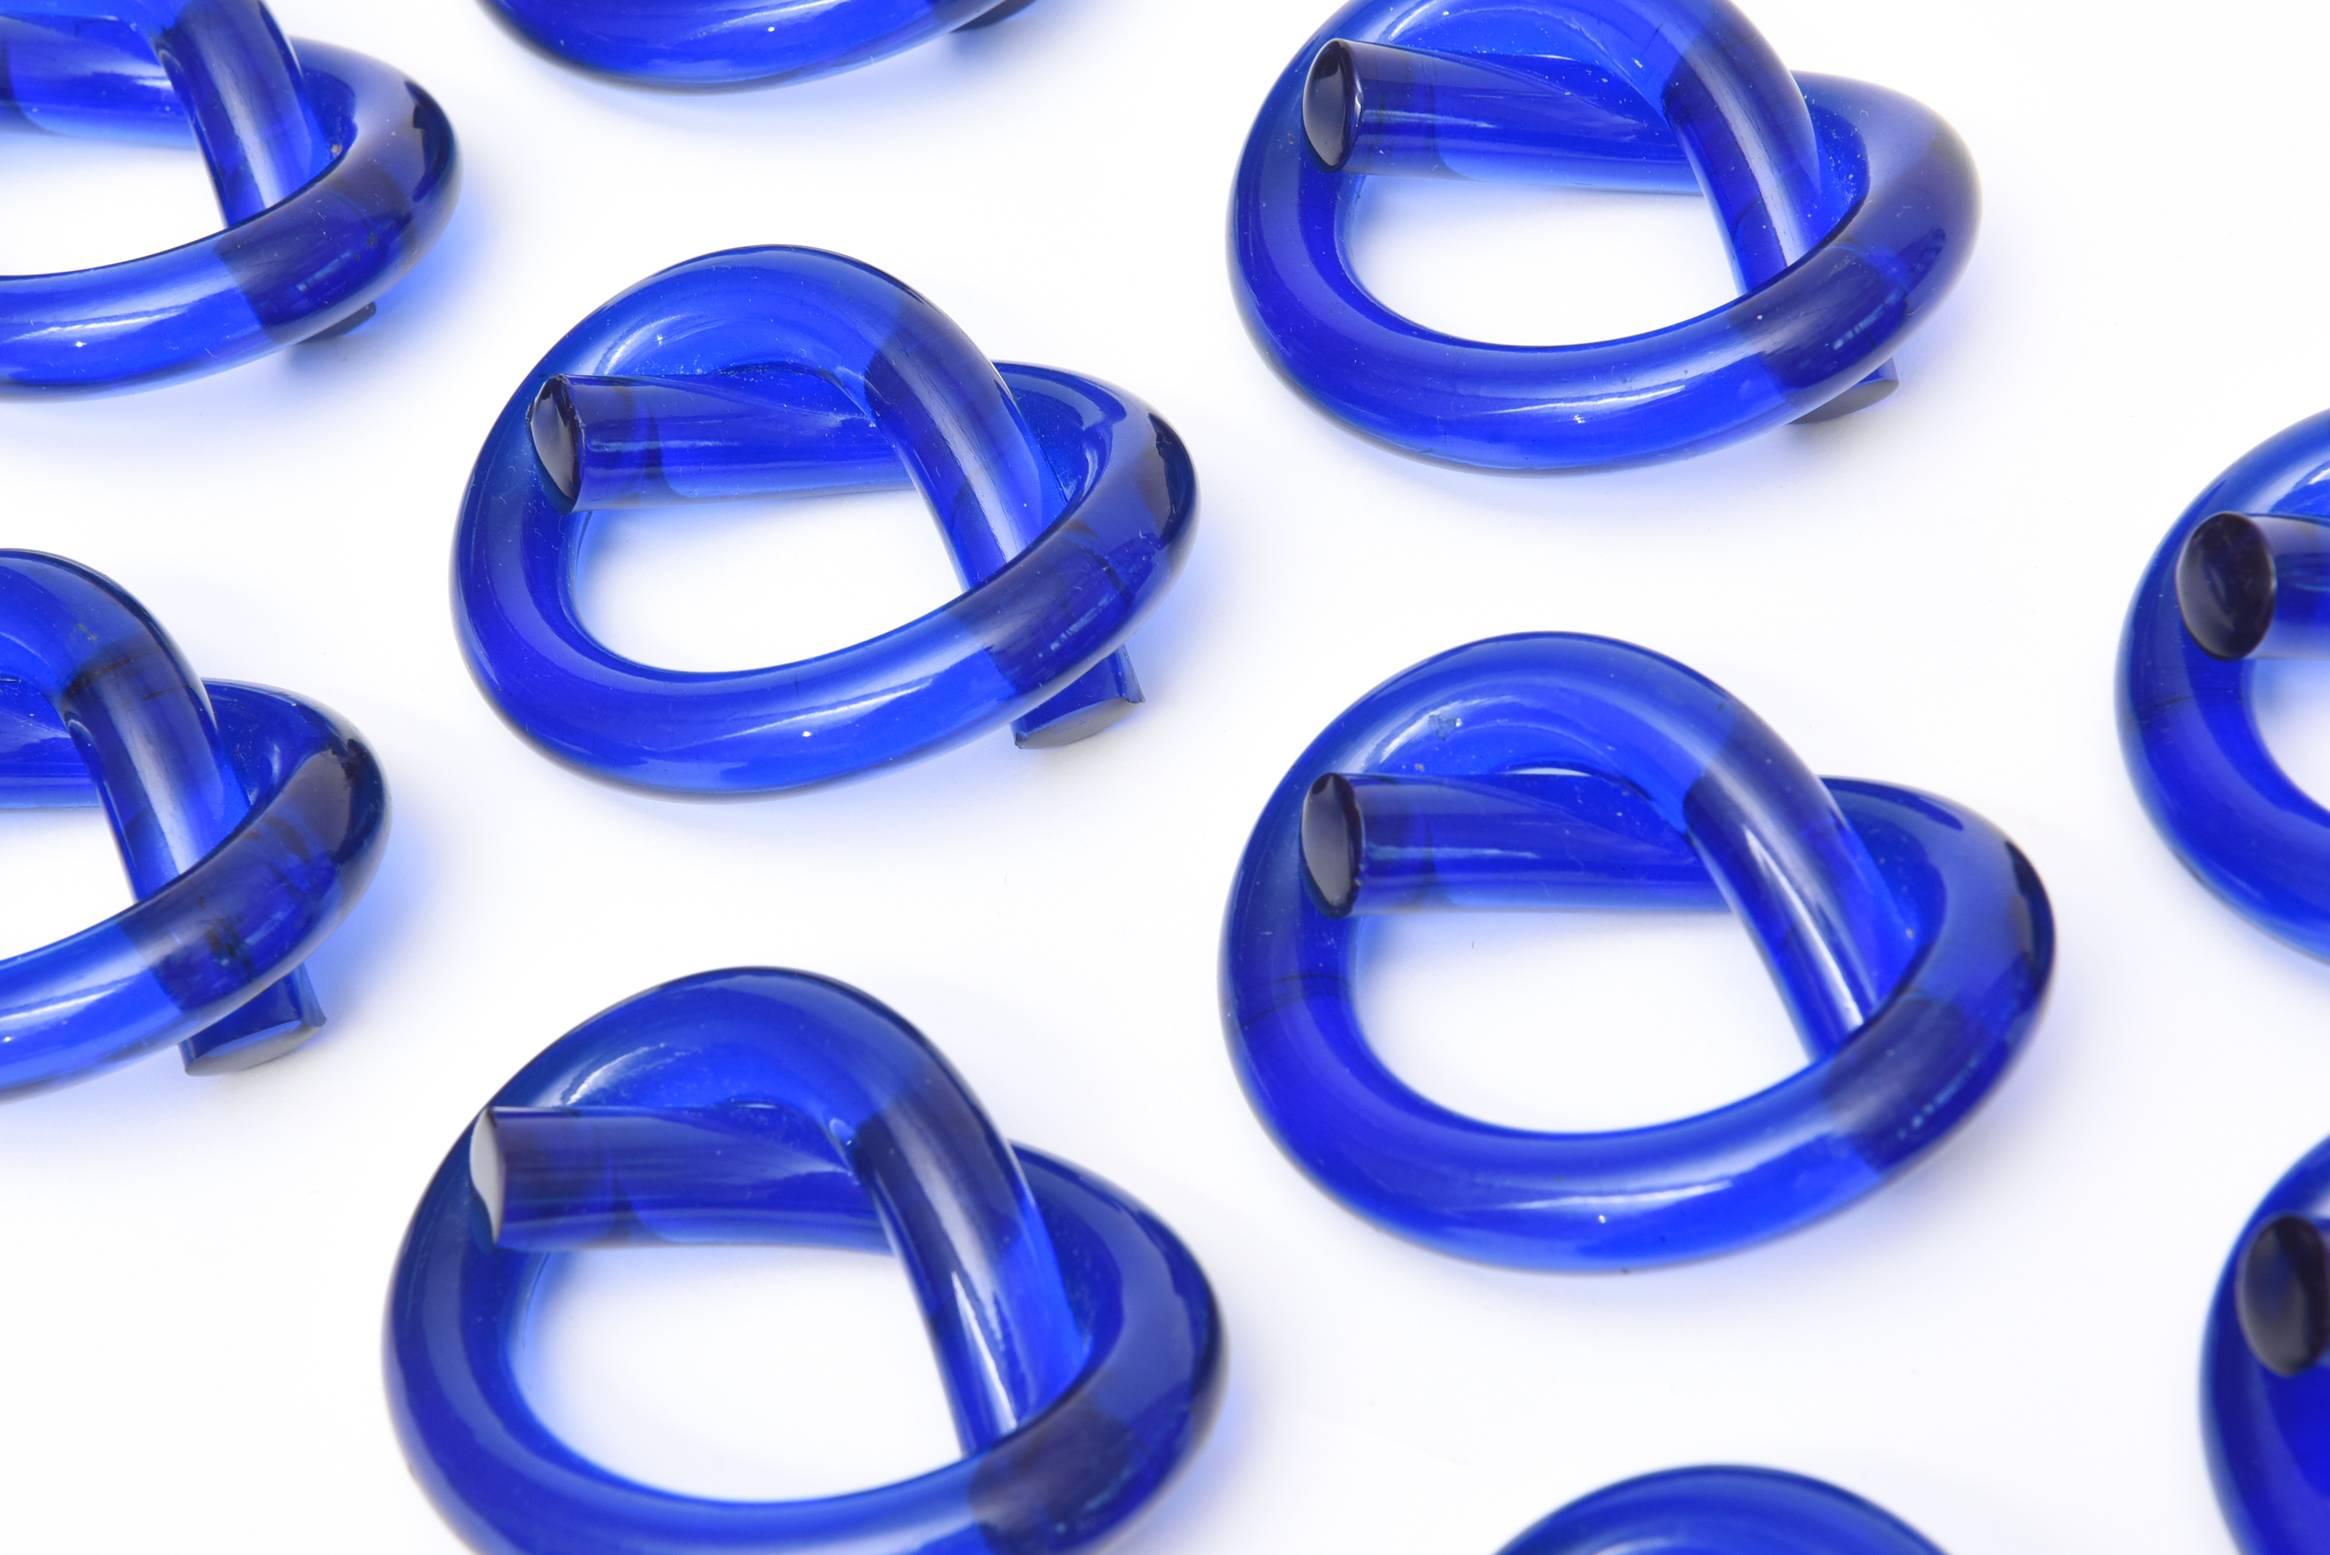 The pretzel like form of Dorothy Thorpe's work in apparent in these striking cobalt blue Lucite
napkin rings. There are a colorful and happy addition to any table setting.
The color is luminous and brilliant modern and great! This color is